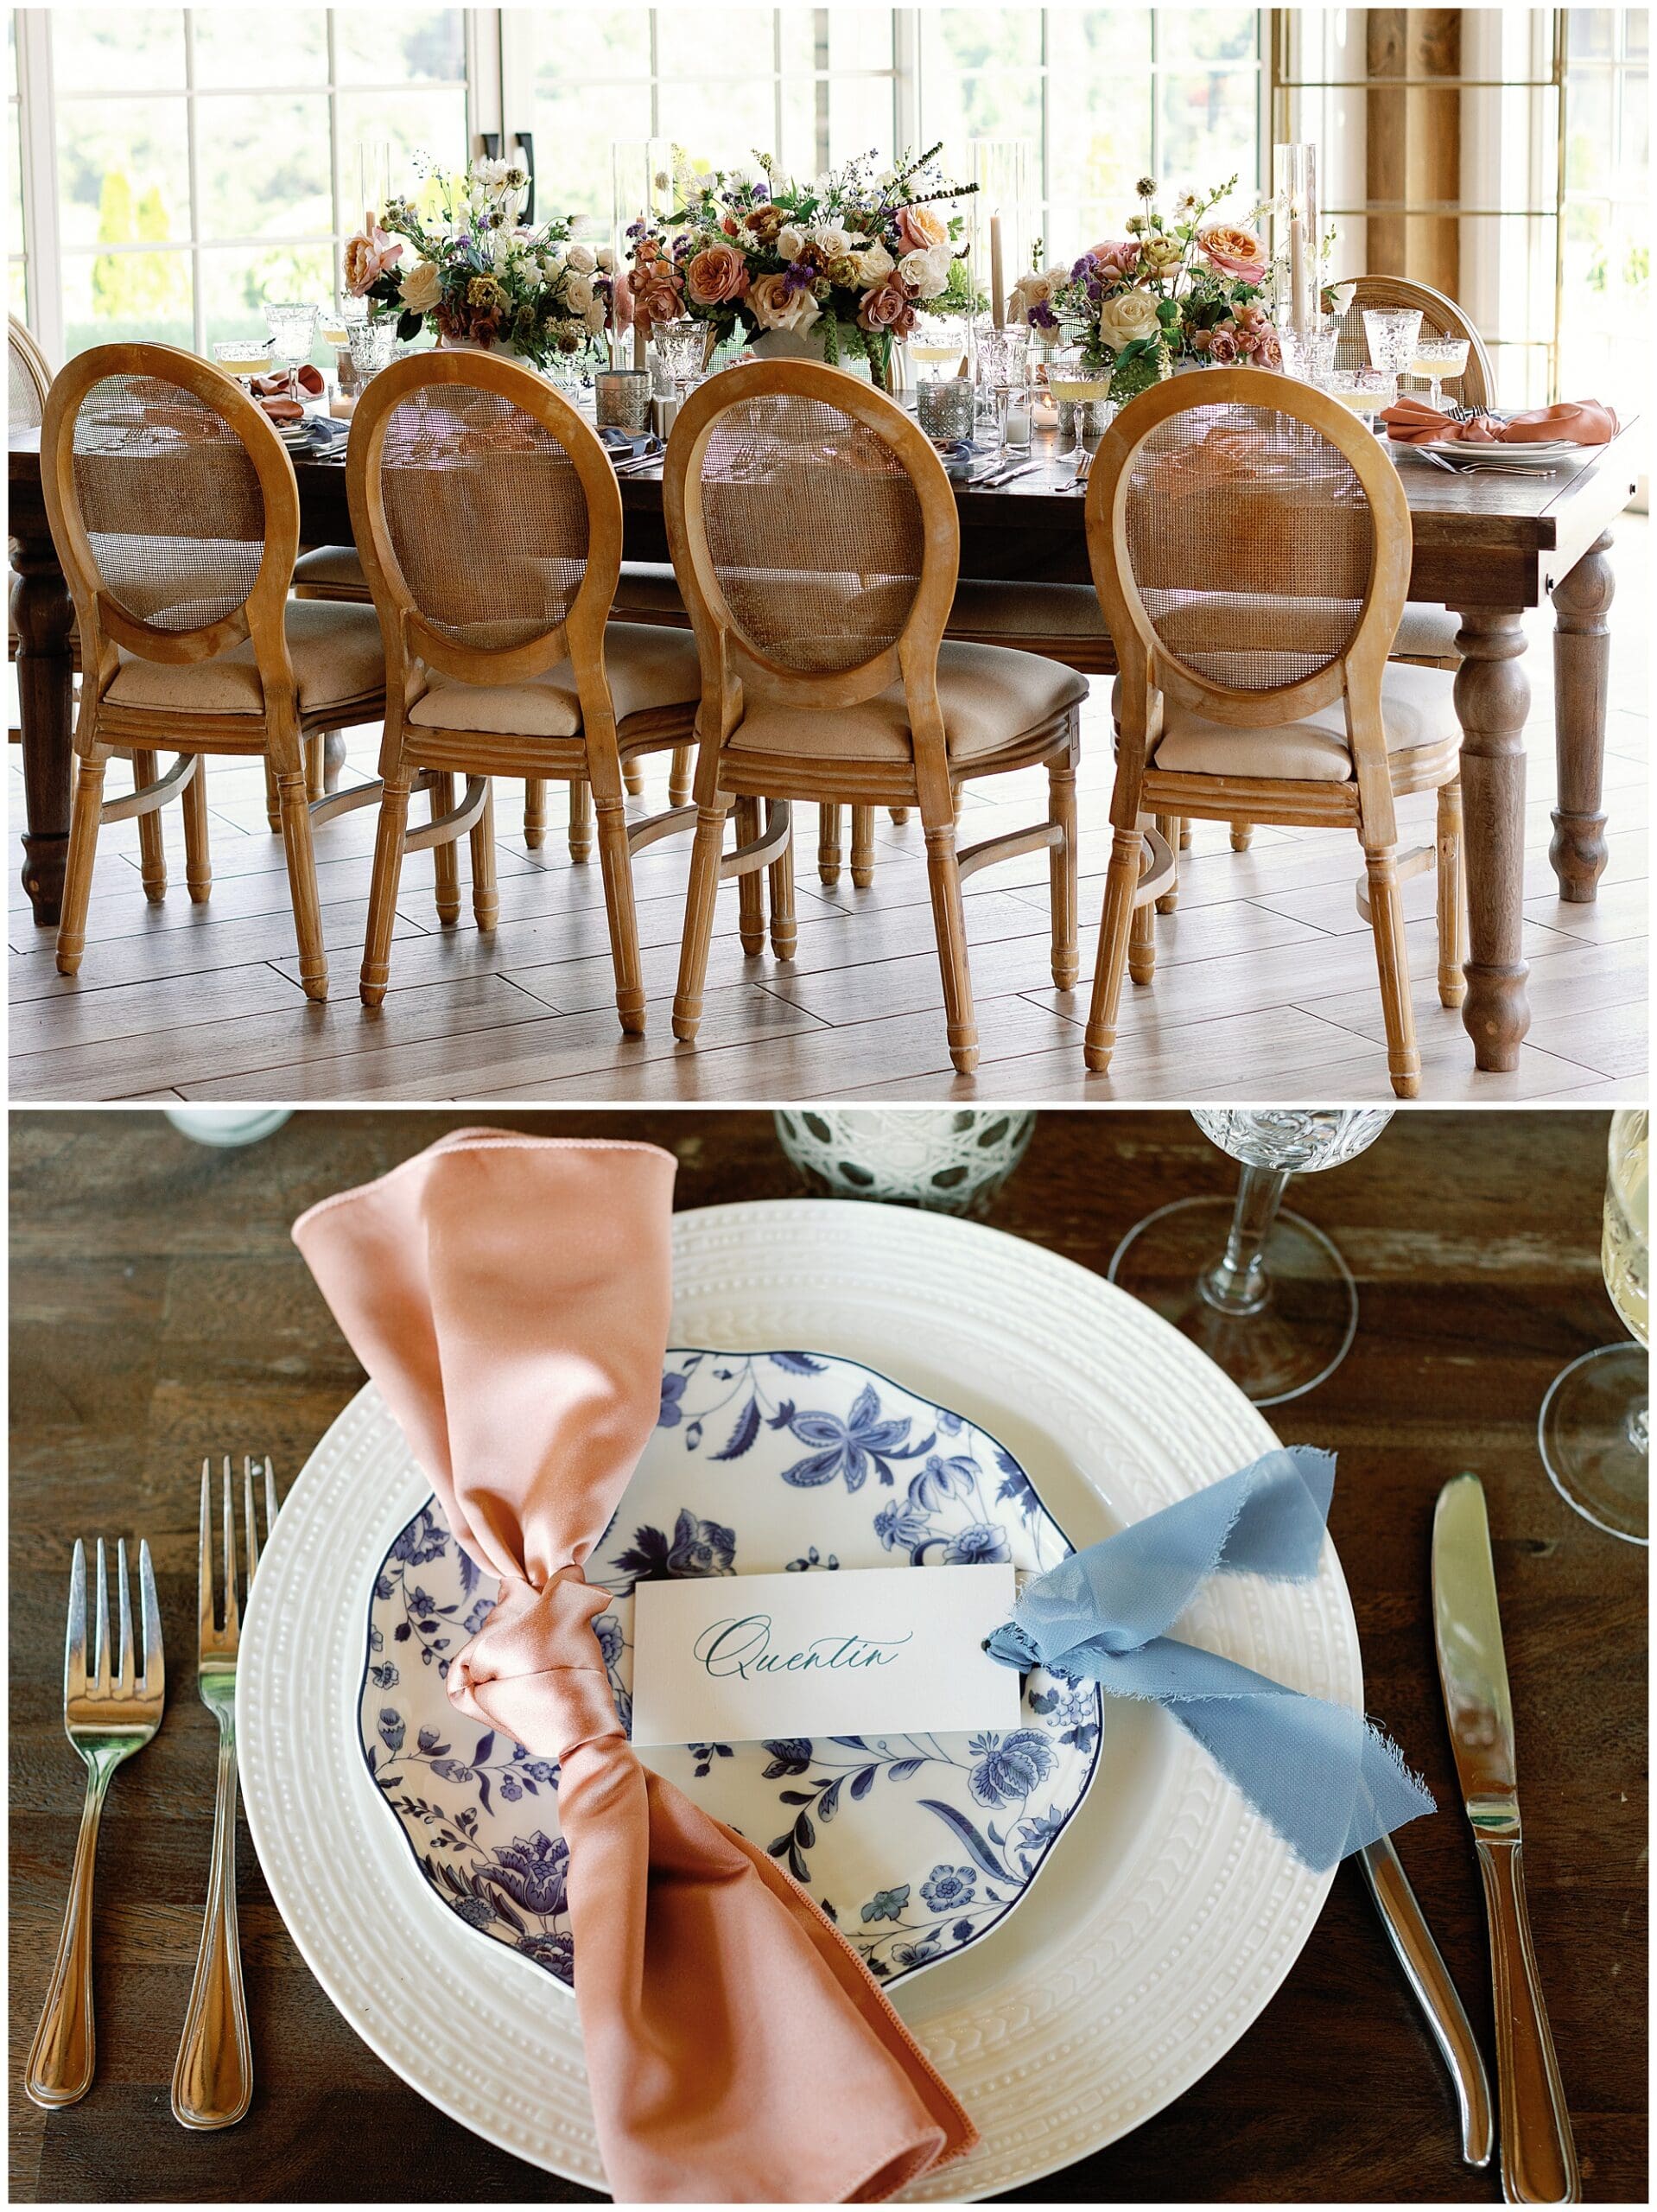 A Parisian-inspired summer wedding table setting at The Ridge, featuring blue and white plates and napkins.